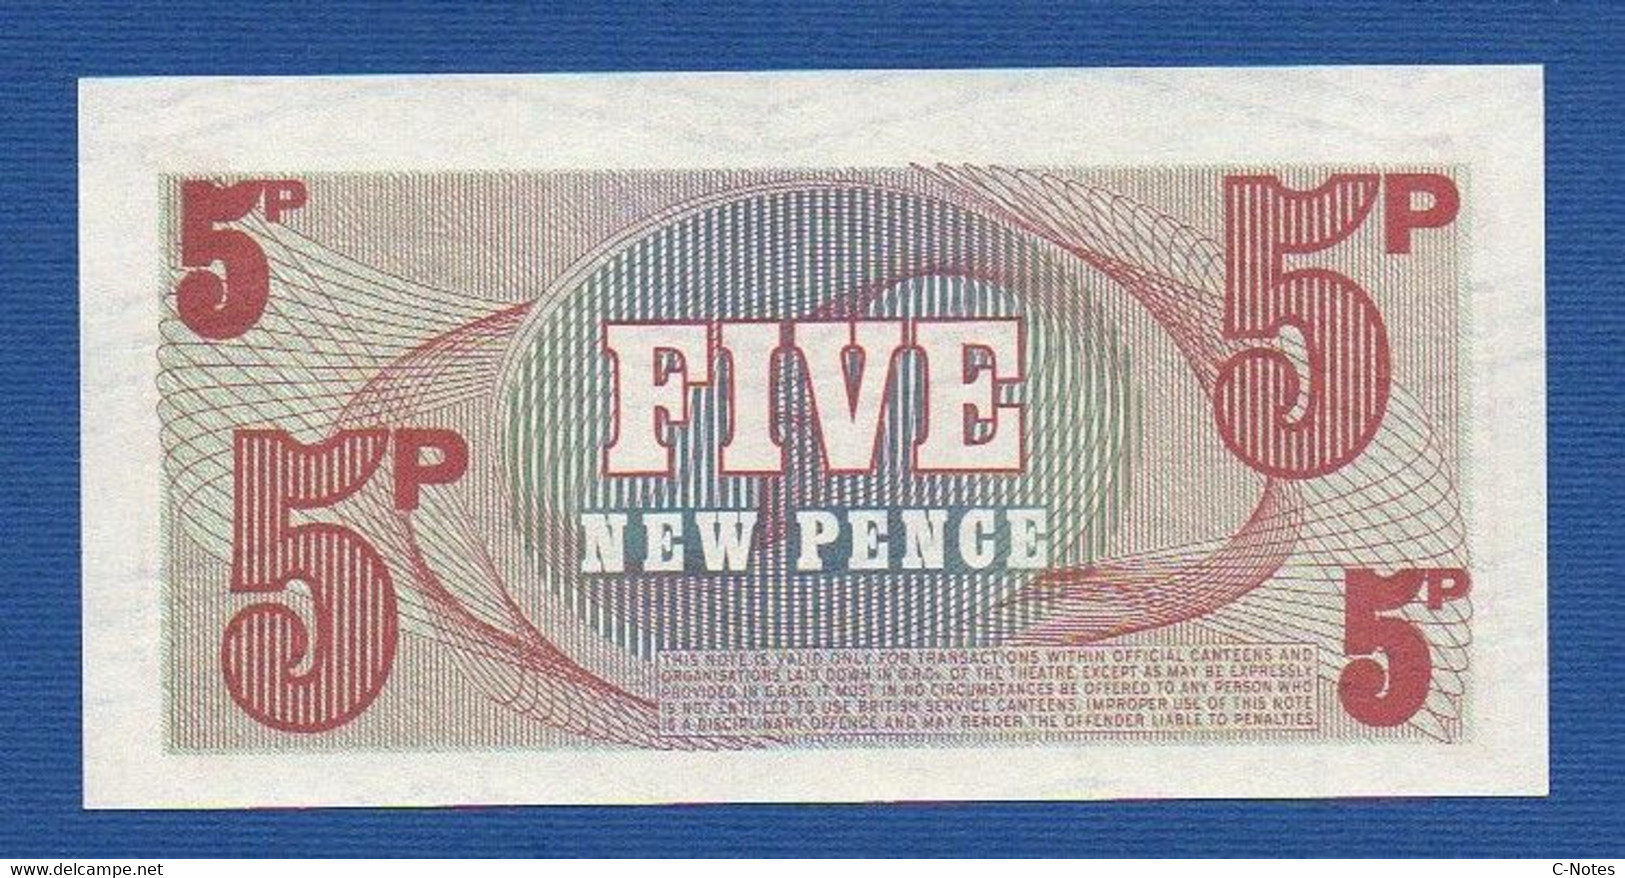 GREAT BRITAIN - P.M47 – 5 New Pence ND (1972) UNC, No Serial, Printer Bradbury Wilkinson, New Malden - British Armed Forces & Special Vouchers